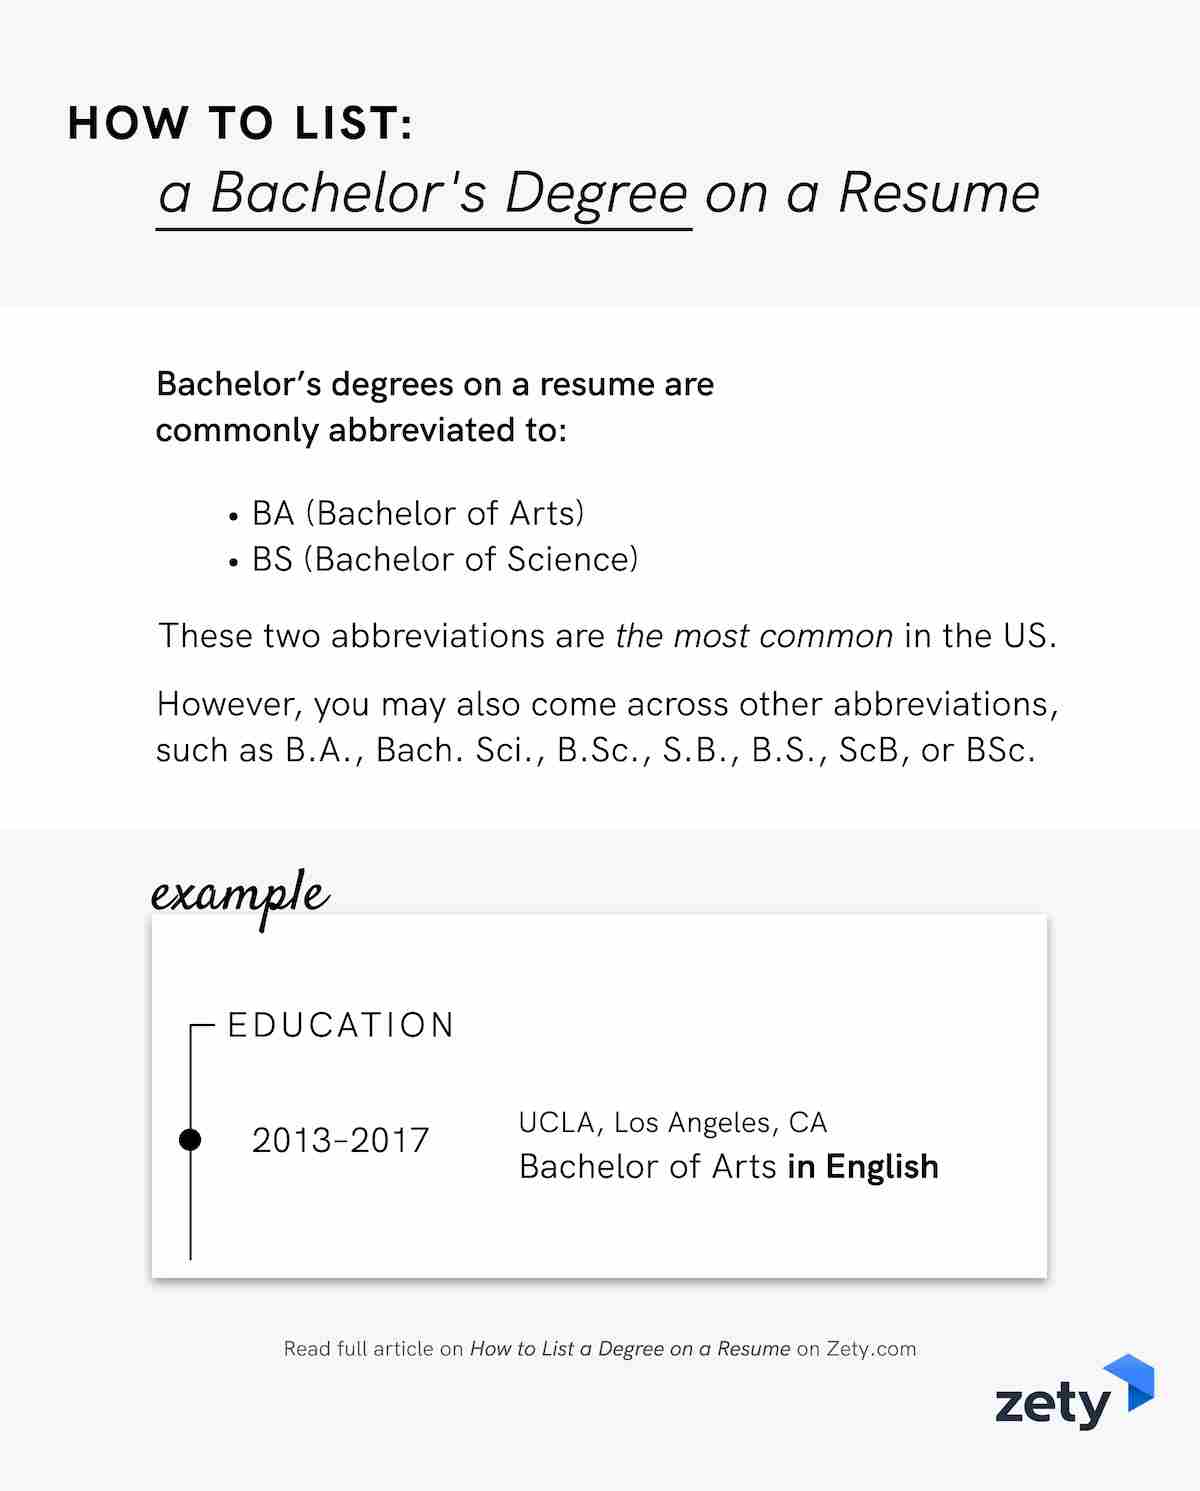 how to list bachelor degree on resume examples